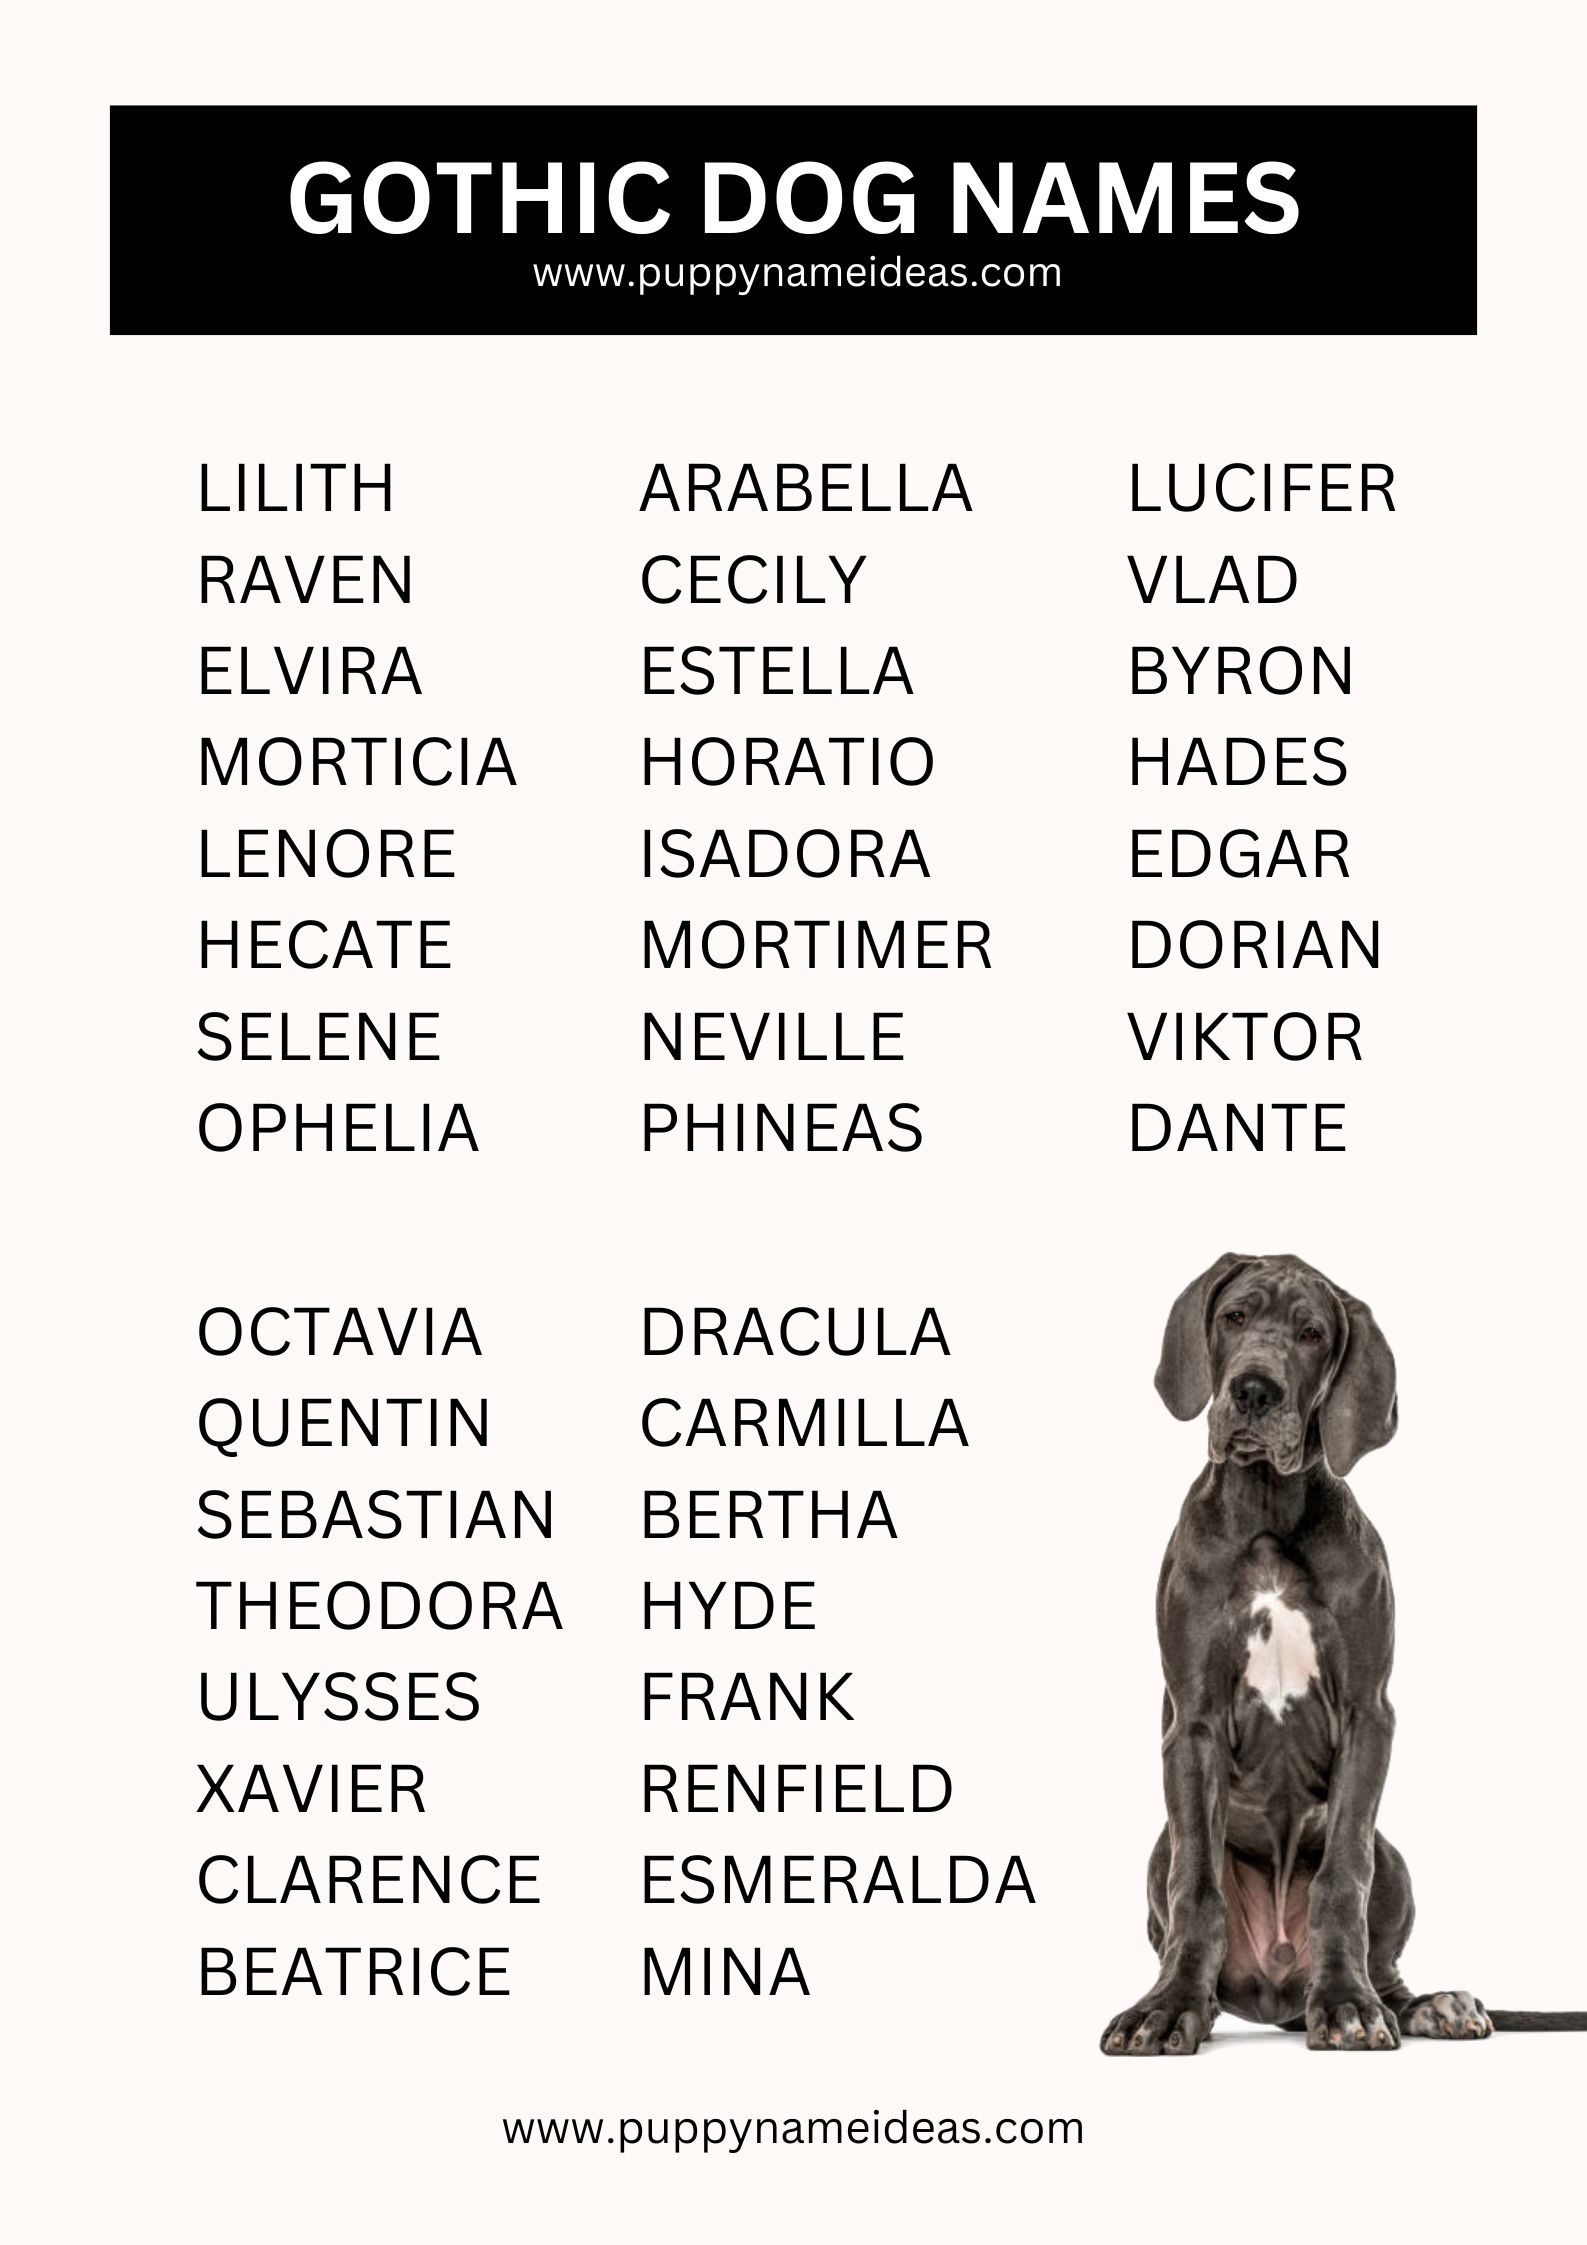 List Of Gothic Dog Names